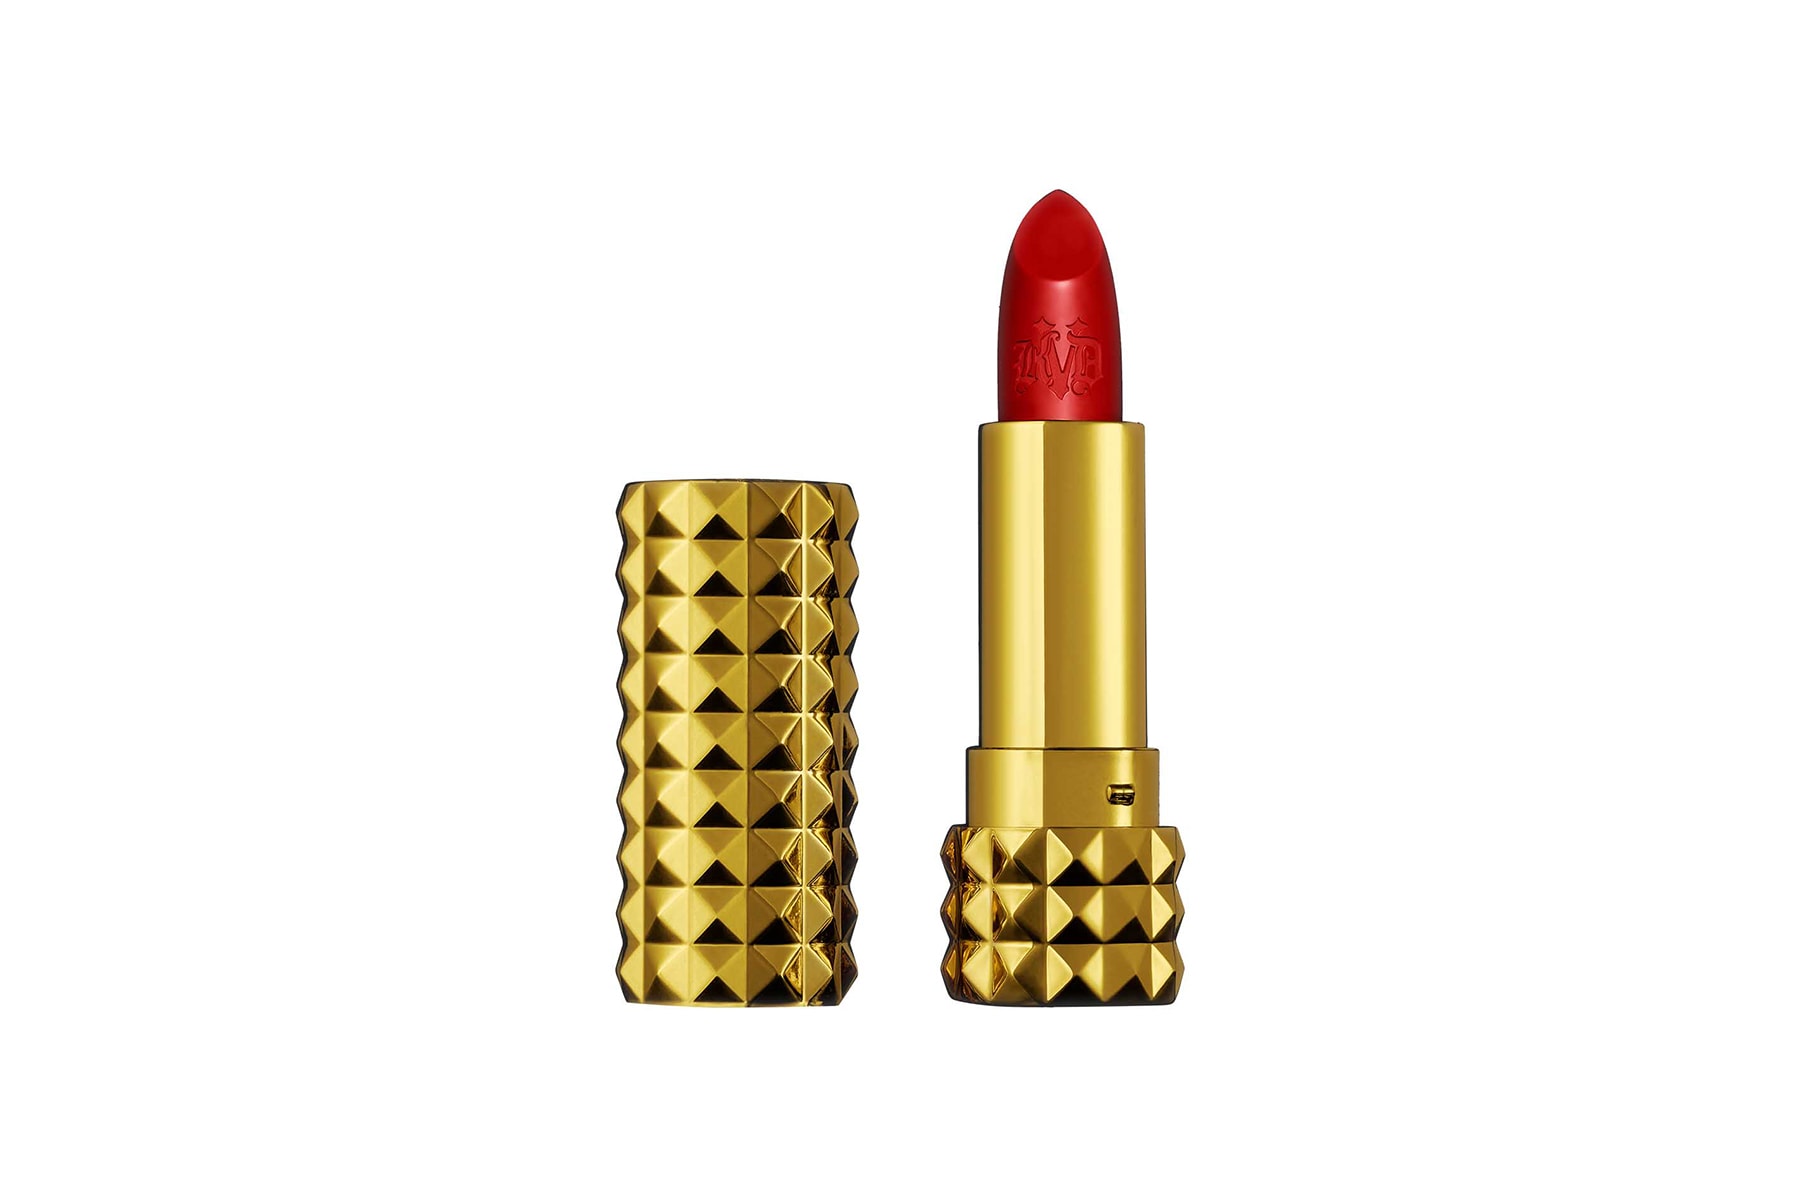 kat von d beauty 10 year anniversary makeup collection red lipstick gold metal tubbe stud